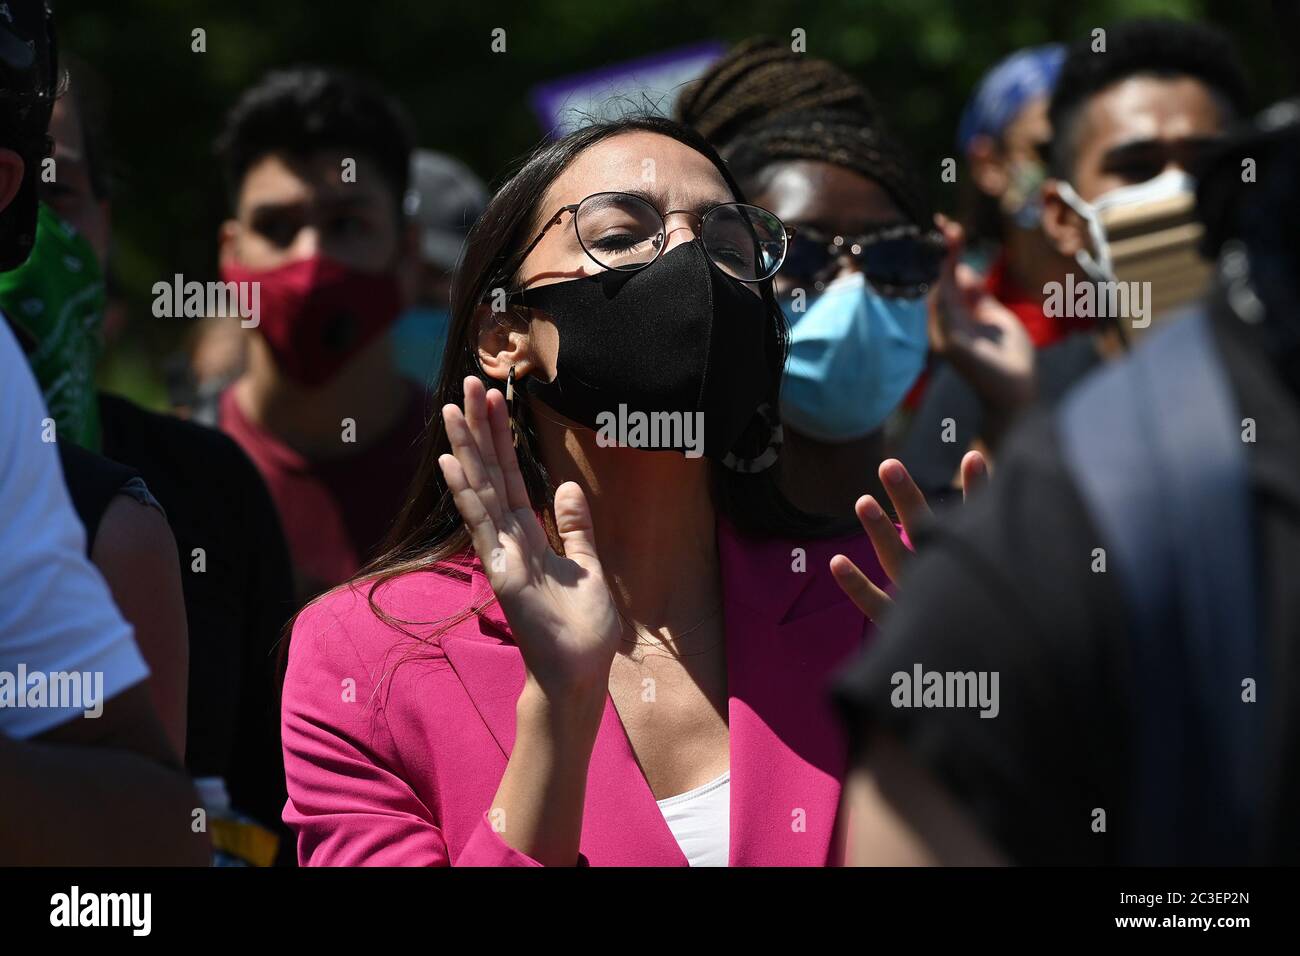 Wearing a mask in the time of COVID-19, U.S. Representative Alexandria Ocasio-Cortez (purple) attends a Juneteenth celebration rally in front of the Unisphere in Flushing Meadows-Corona Park in the borough of Queens, New York, June 19, 2020. Juneteenth is celebrated as a commemoration of the ending of slavery in the United States.   gi Credit: Sipa USA/Alamy Live News Stock Photo